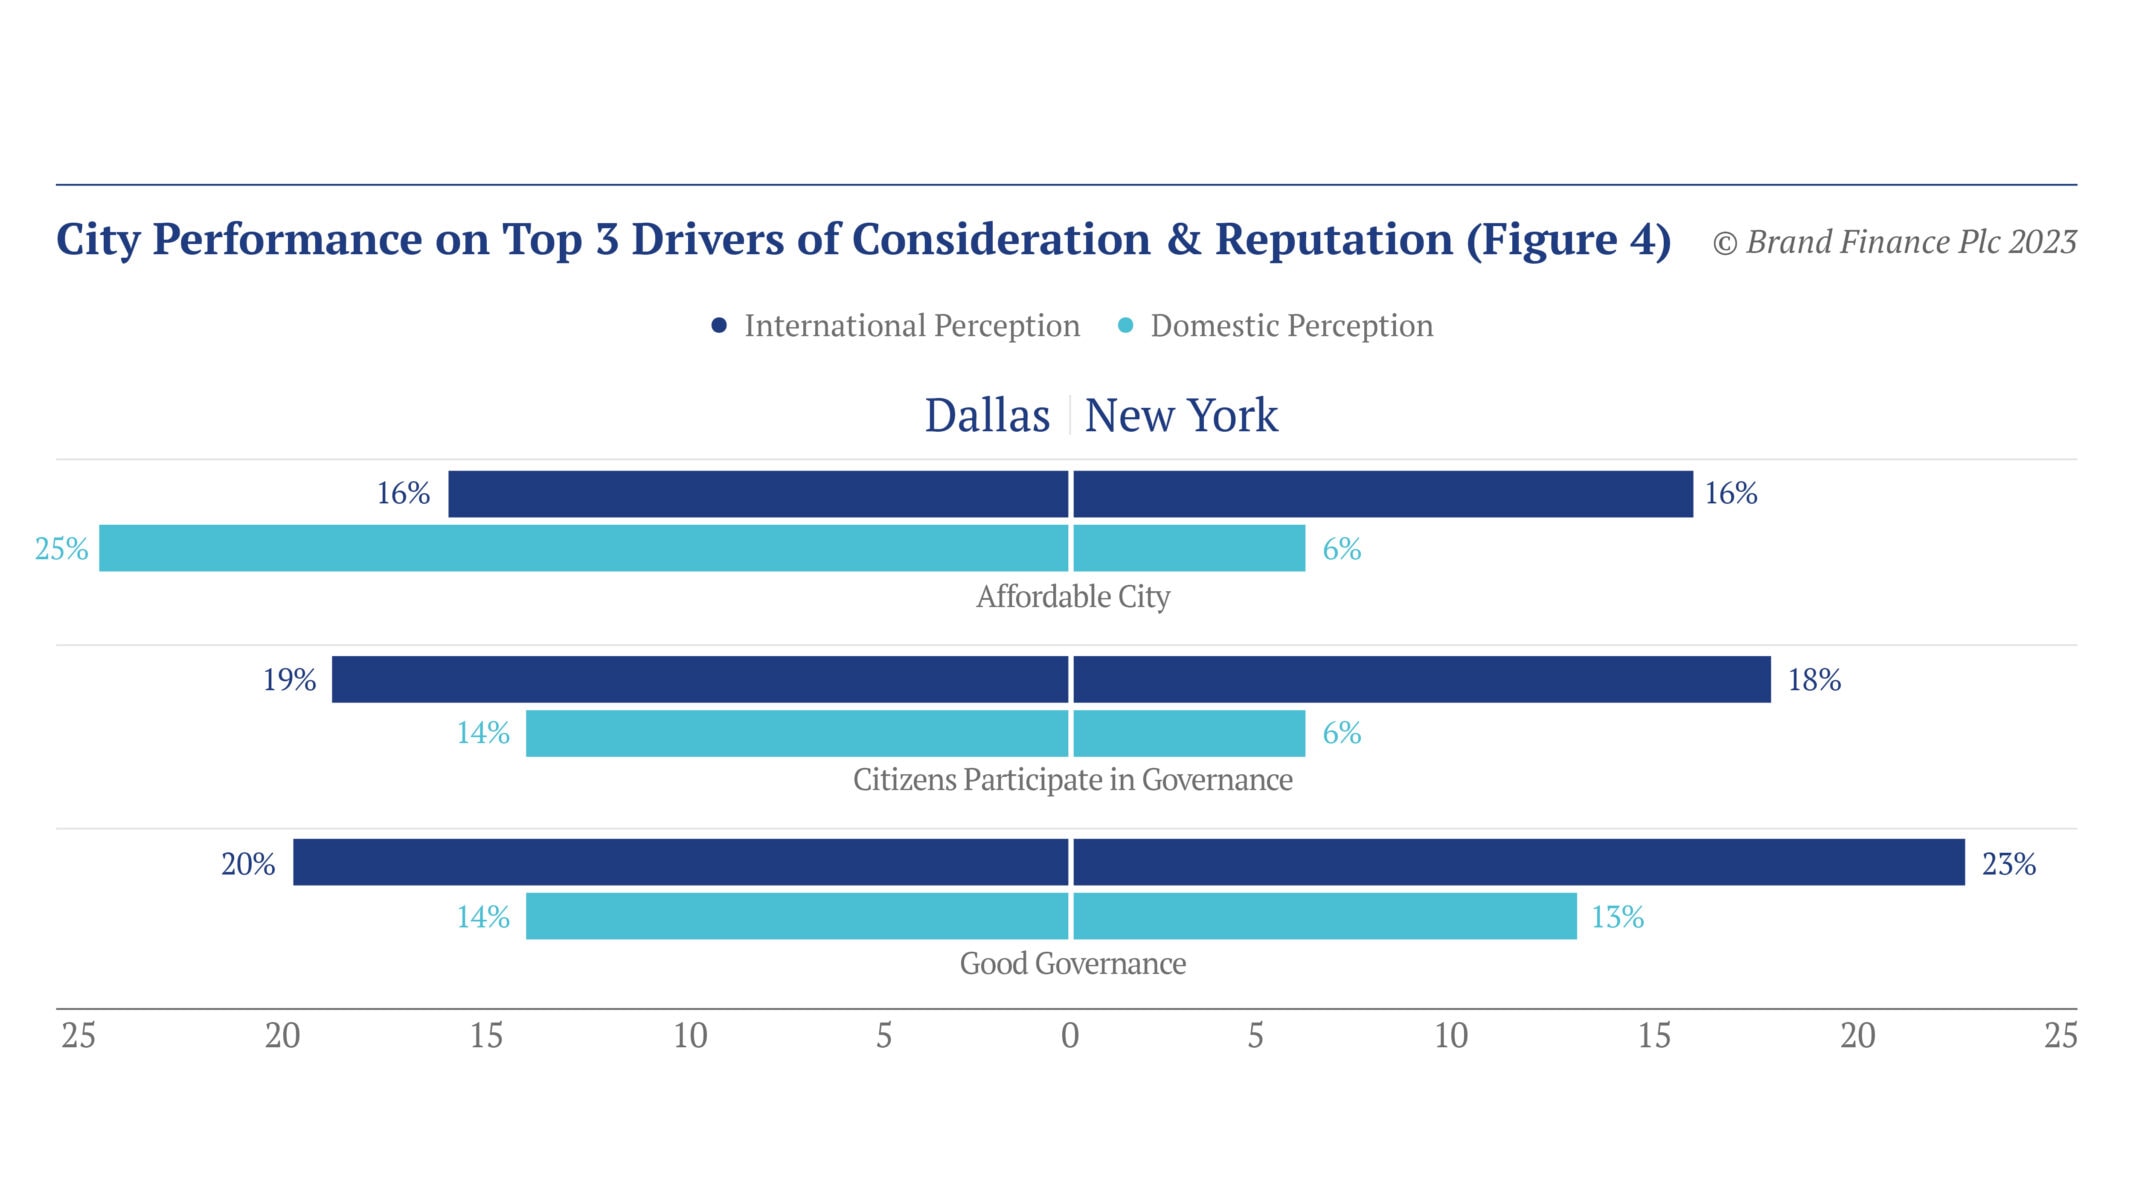 City Performance on Top 3 Drivers of Consideration and Reputation 